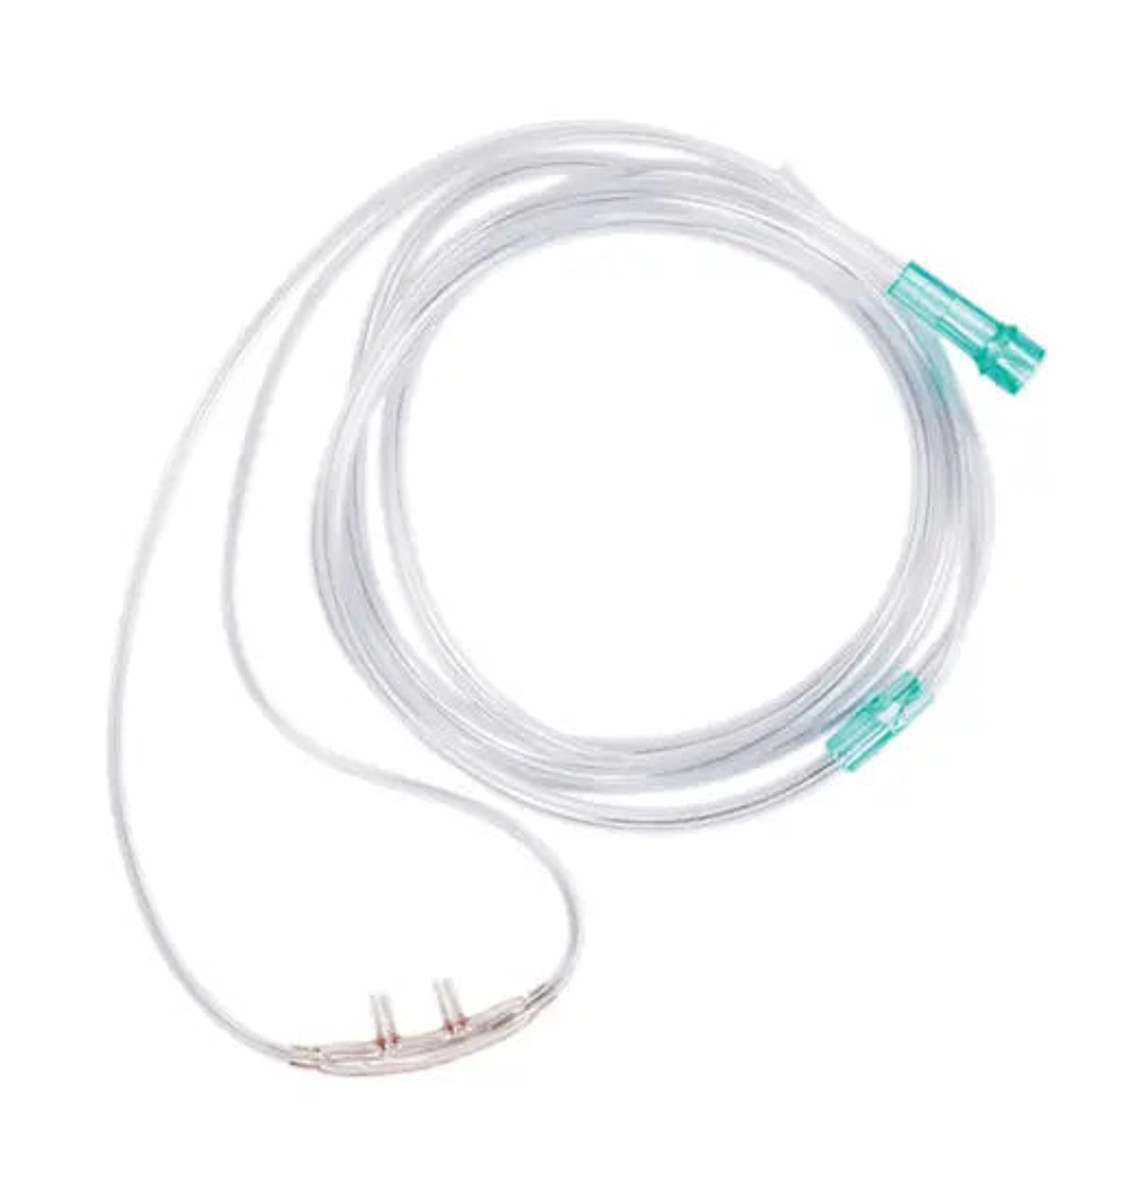 Vyaire AirLife Crush-Resistant Oxygen Tubing